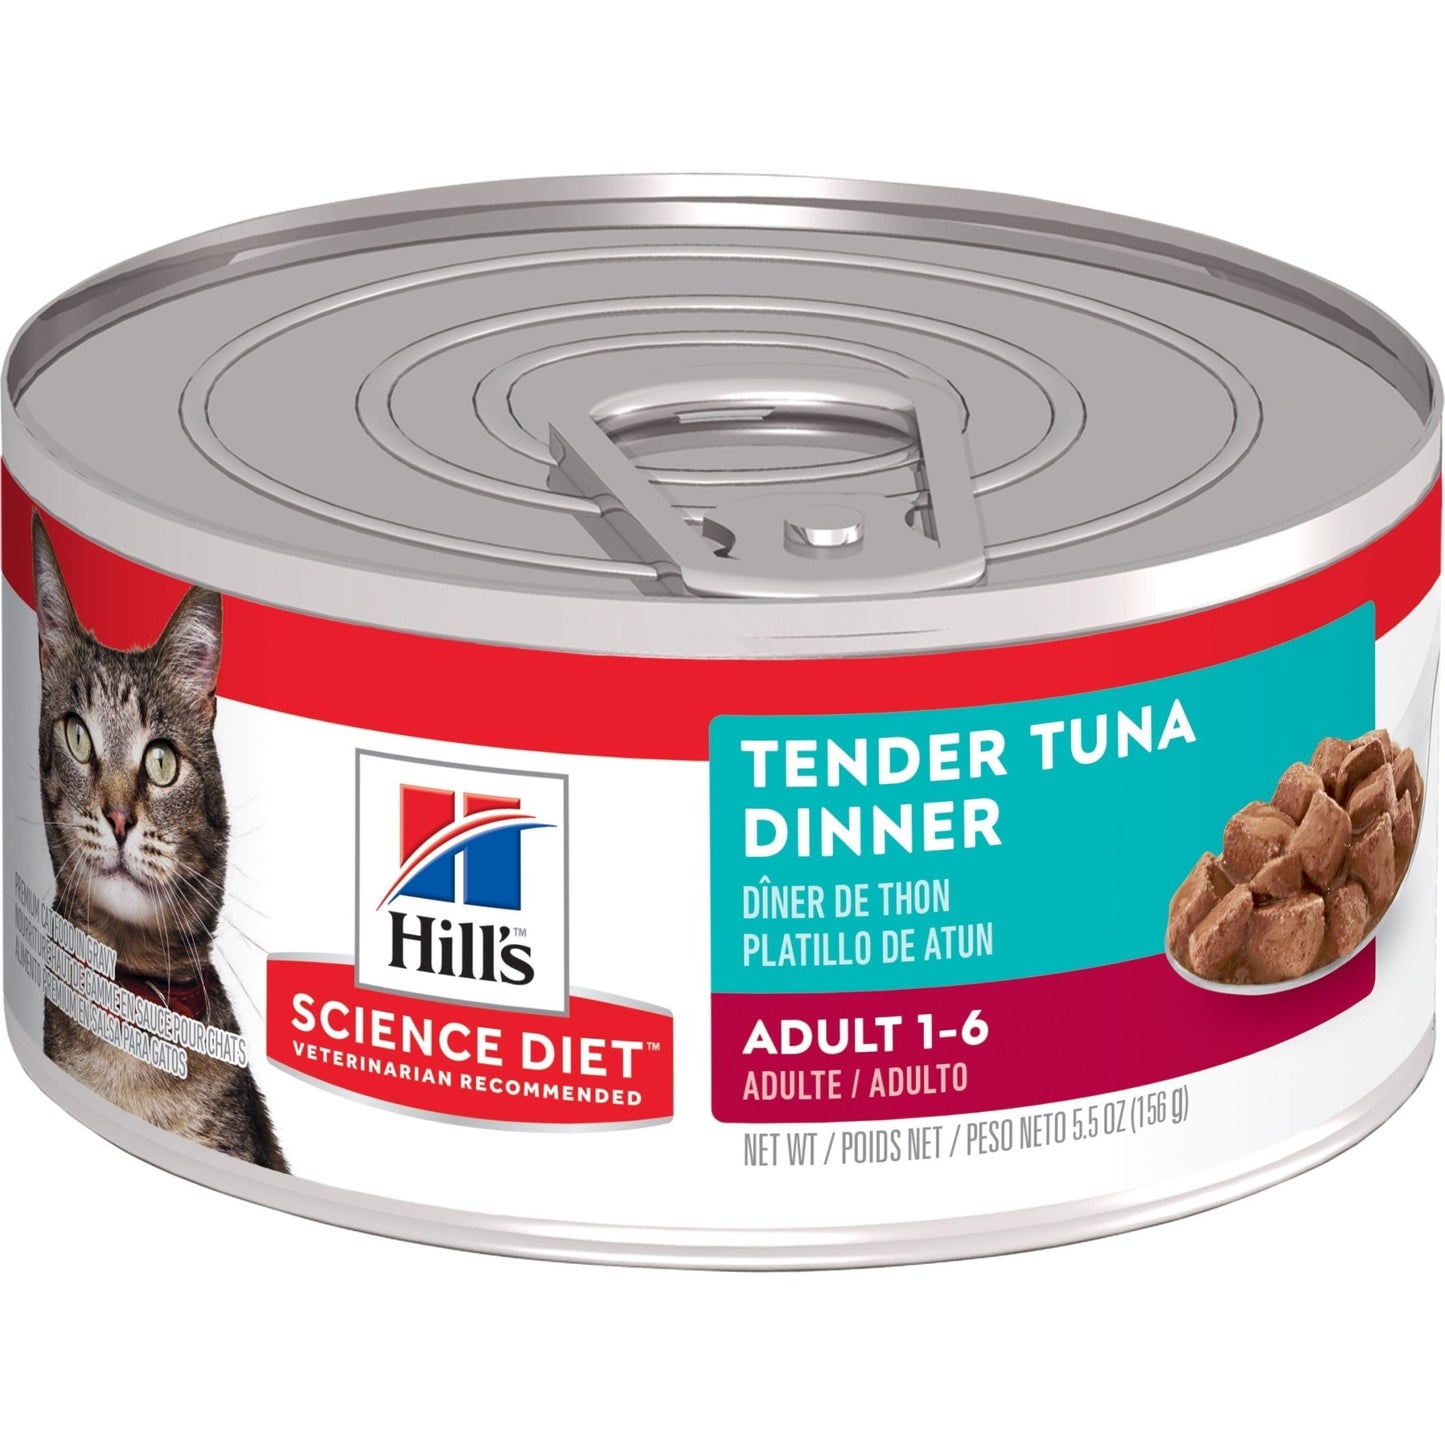 Hill's Science Diet Adult Tender Dinners Tuna Canned Cat Food 24x156g - Woonona Petfood & Produce